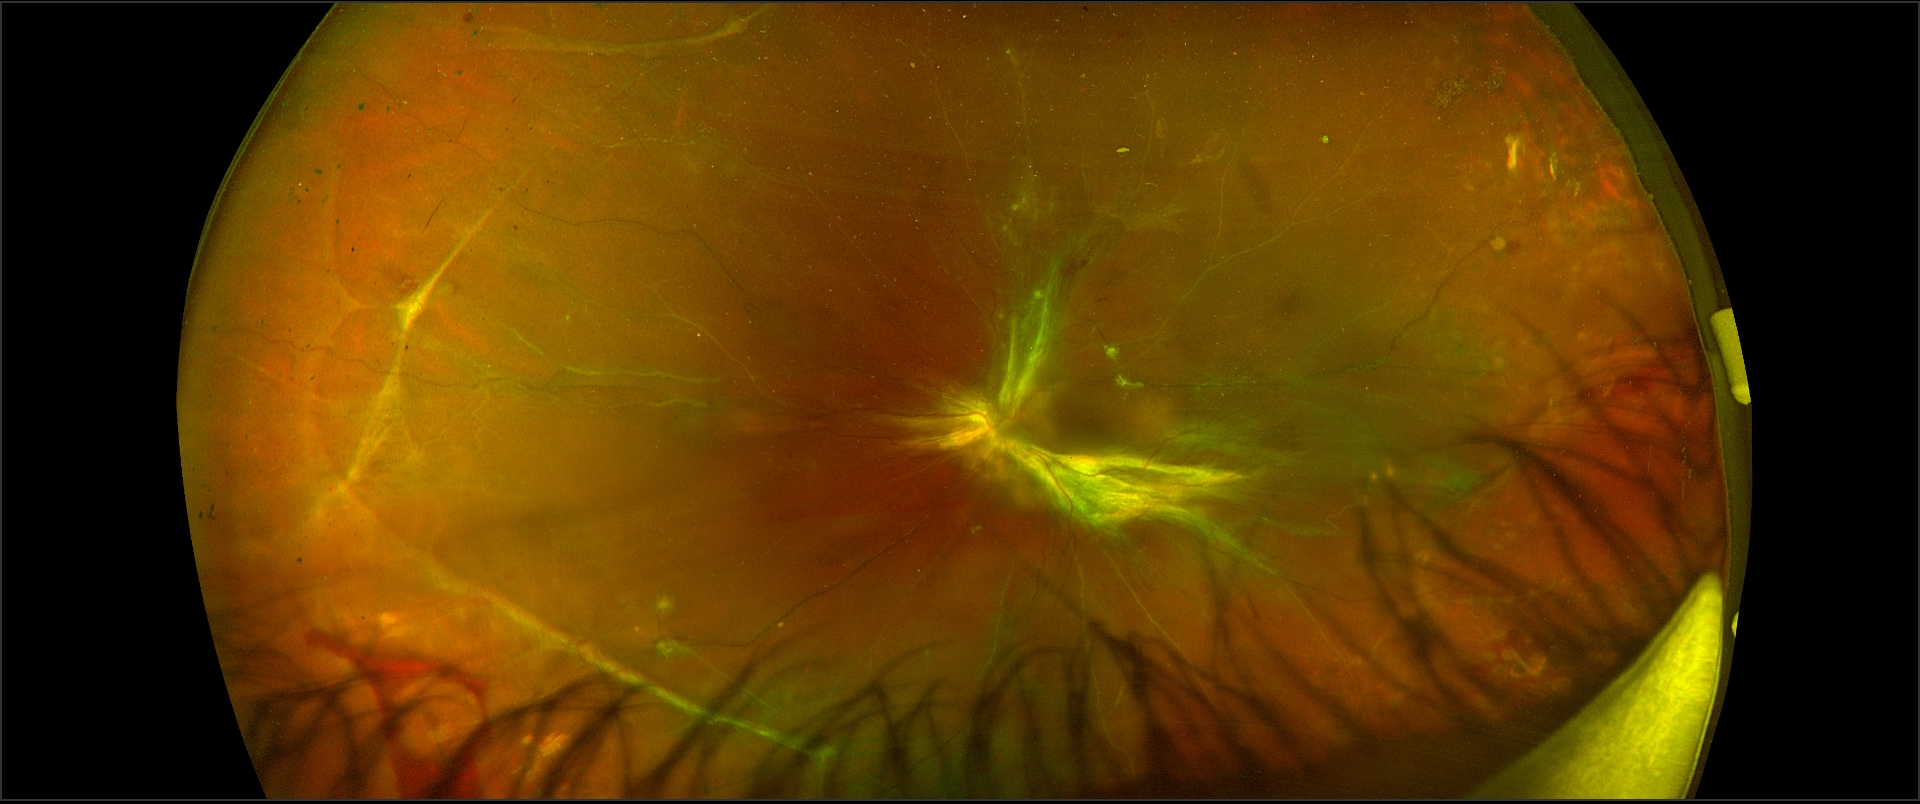 Proliferative diabetic retinopathy with macular traction retinal detachment in the left eye